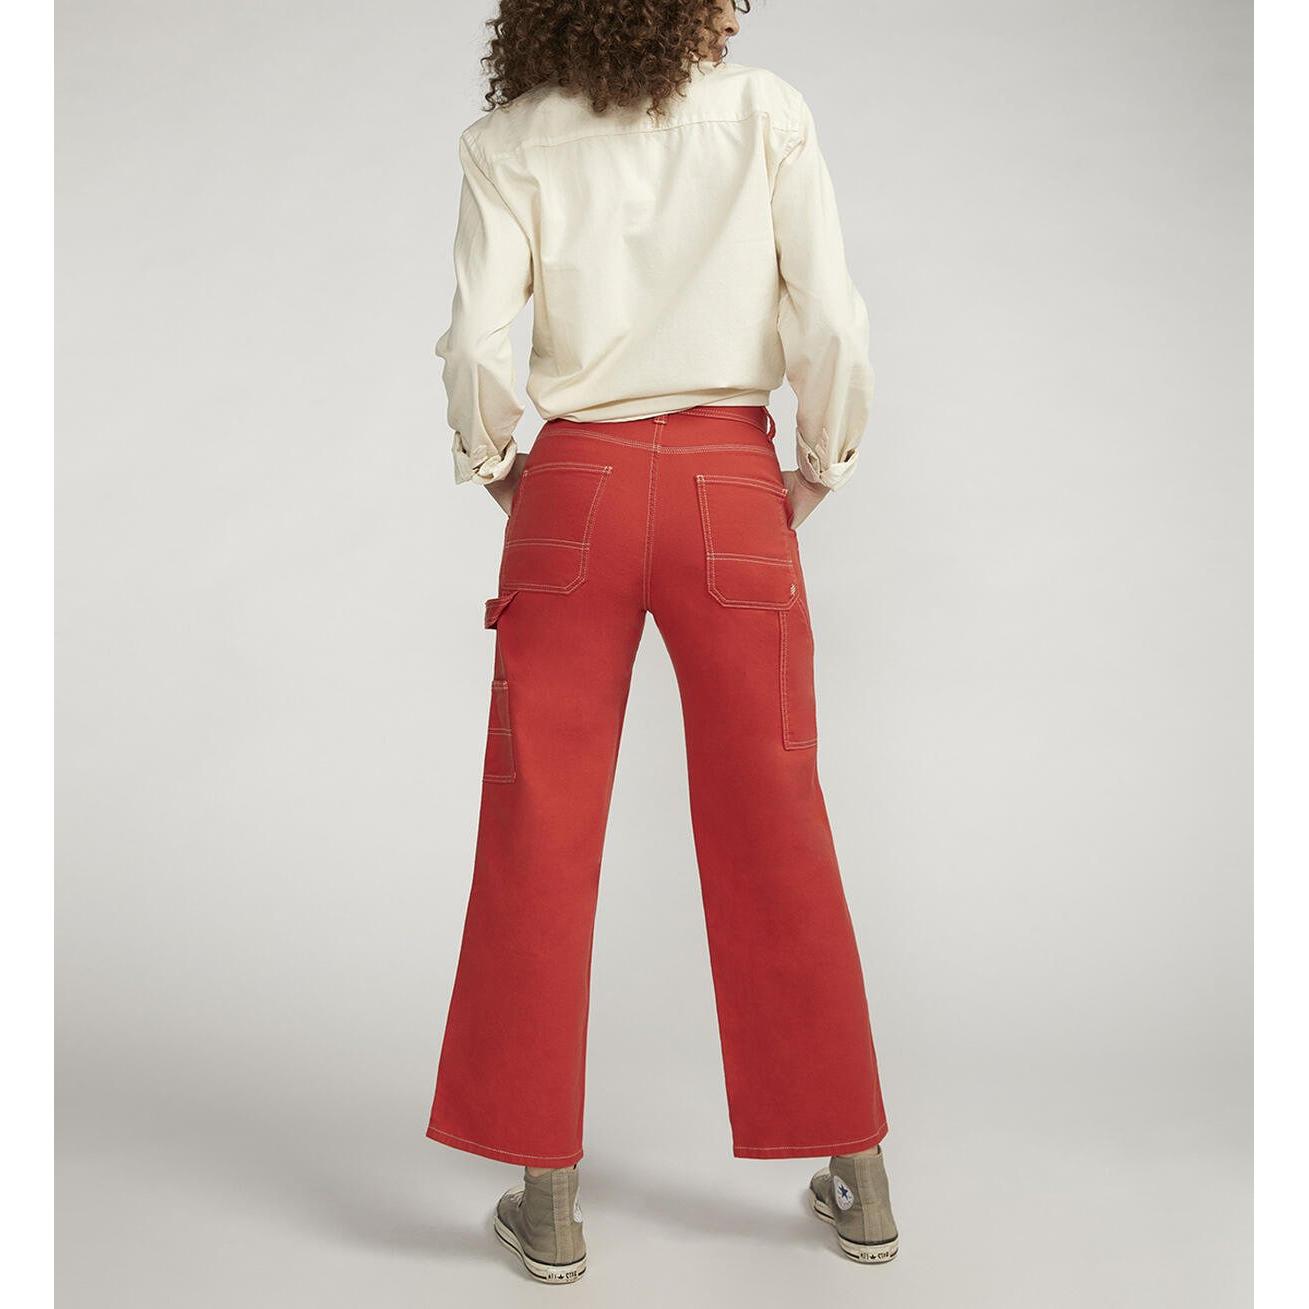 Silver - Relaxed Fit Straight Leg Carpenter Pant in Red-SQ2903513